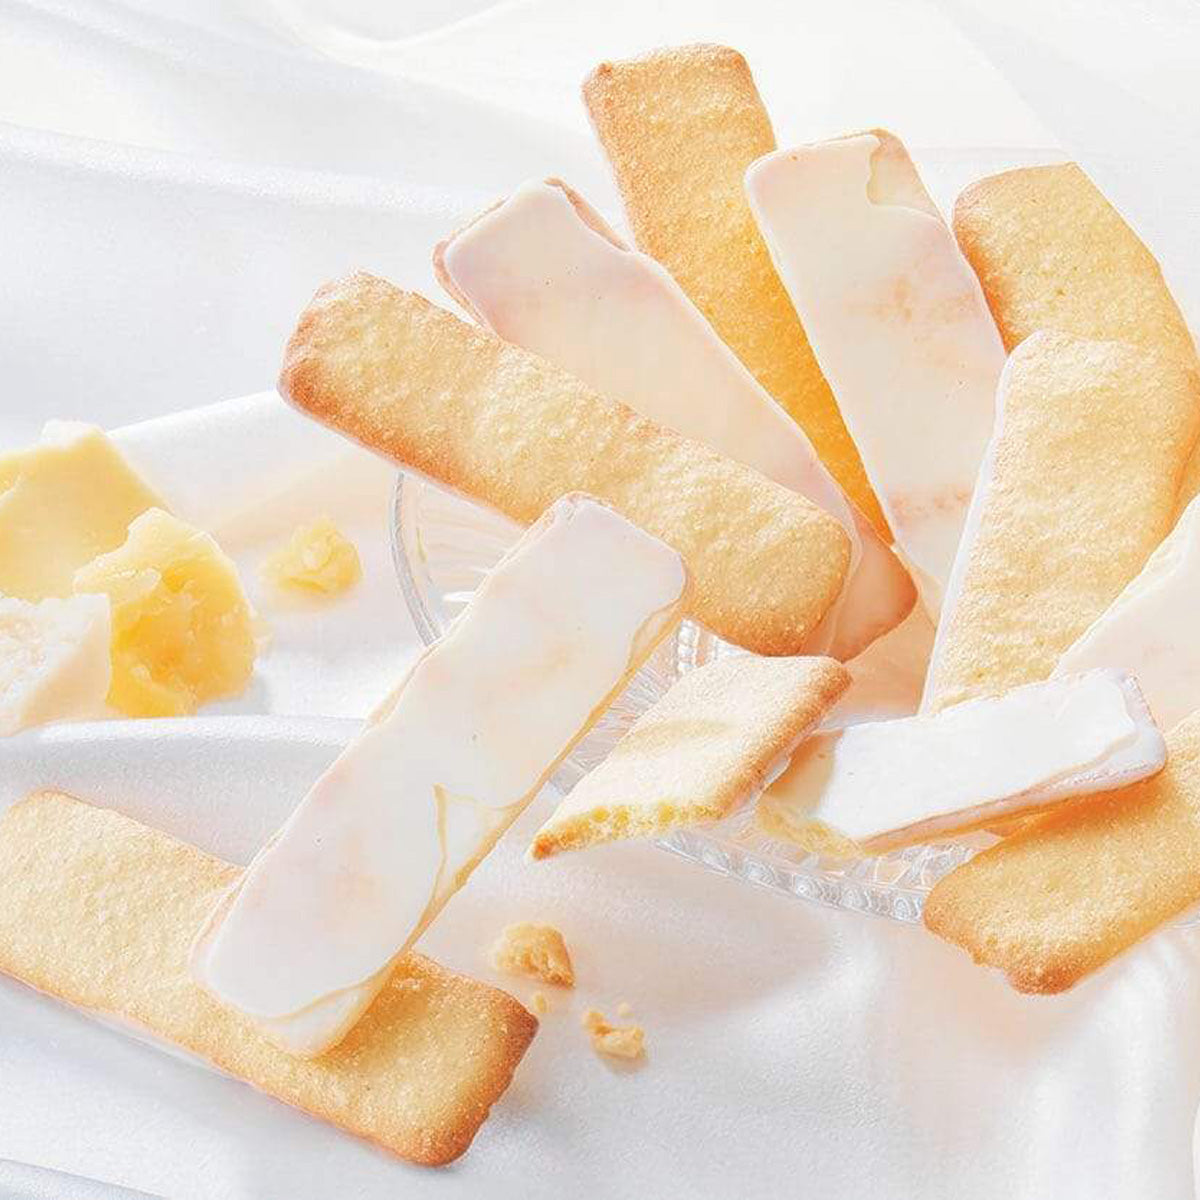 ROYCE' Chocolate - Baton Cookies "Fromage (25 Pcs)" -  Image shows golden cookies coated with white chocolate on crystal bowl. Accents include blocks of cheese. Background is in white. 